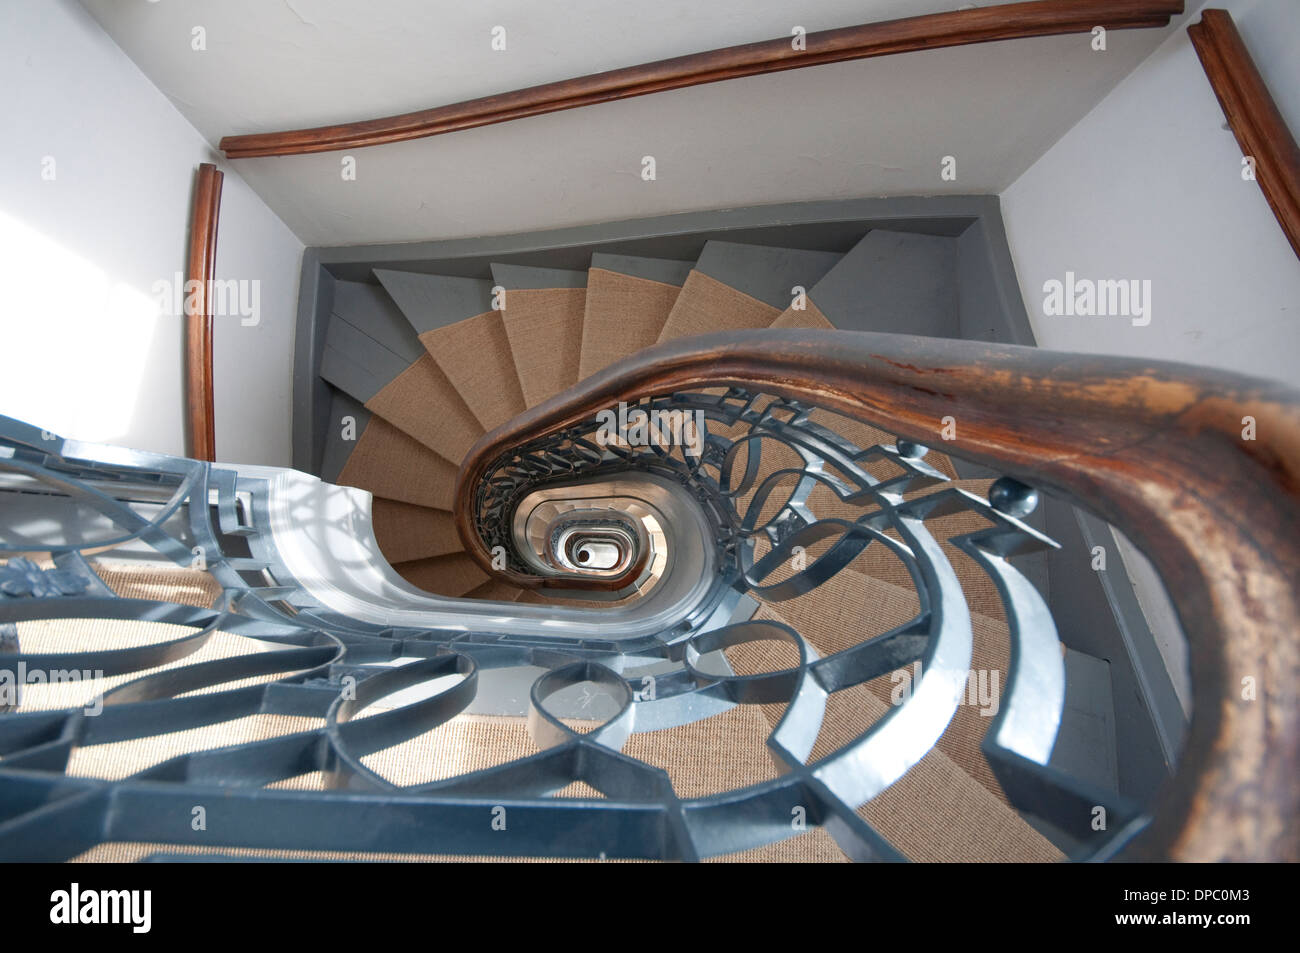 Germany, Berlin, Charlottenburg Castle, Belvedere Palace, Spiral Stairs Stock Photo